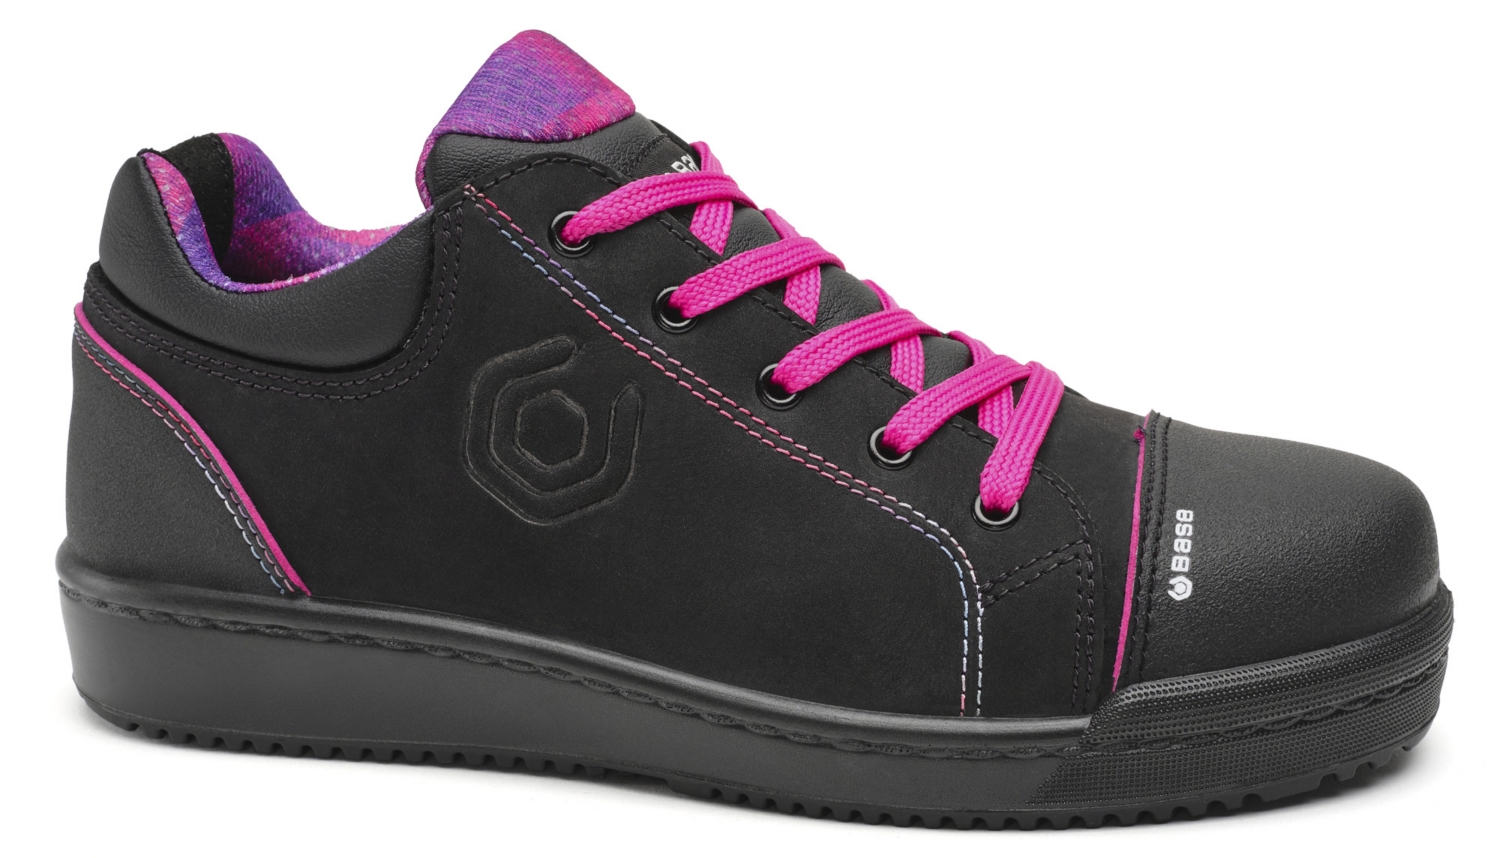 Chaussures basses Margot - S3 SRC Base Protection